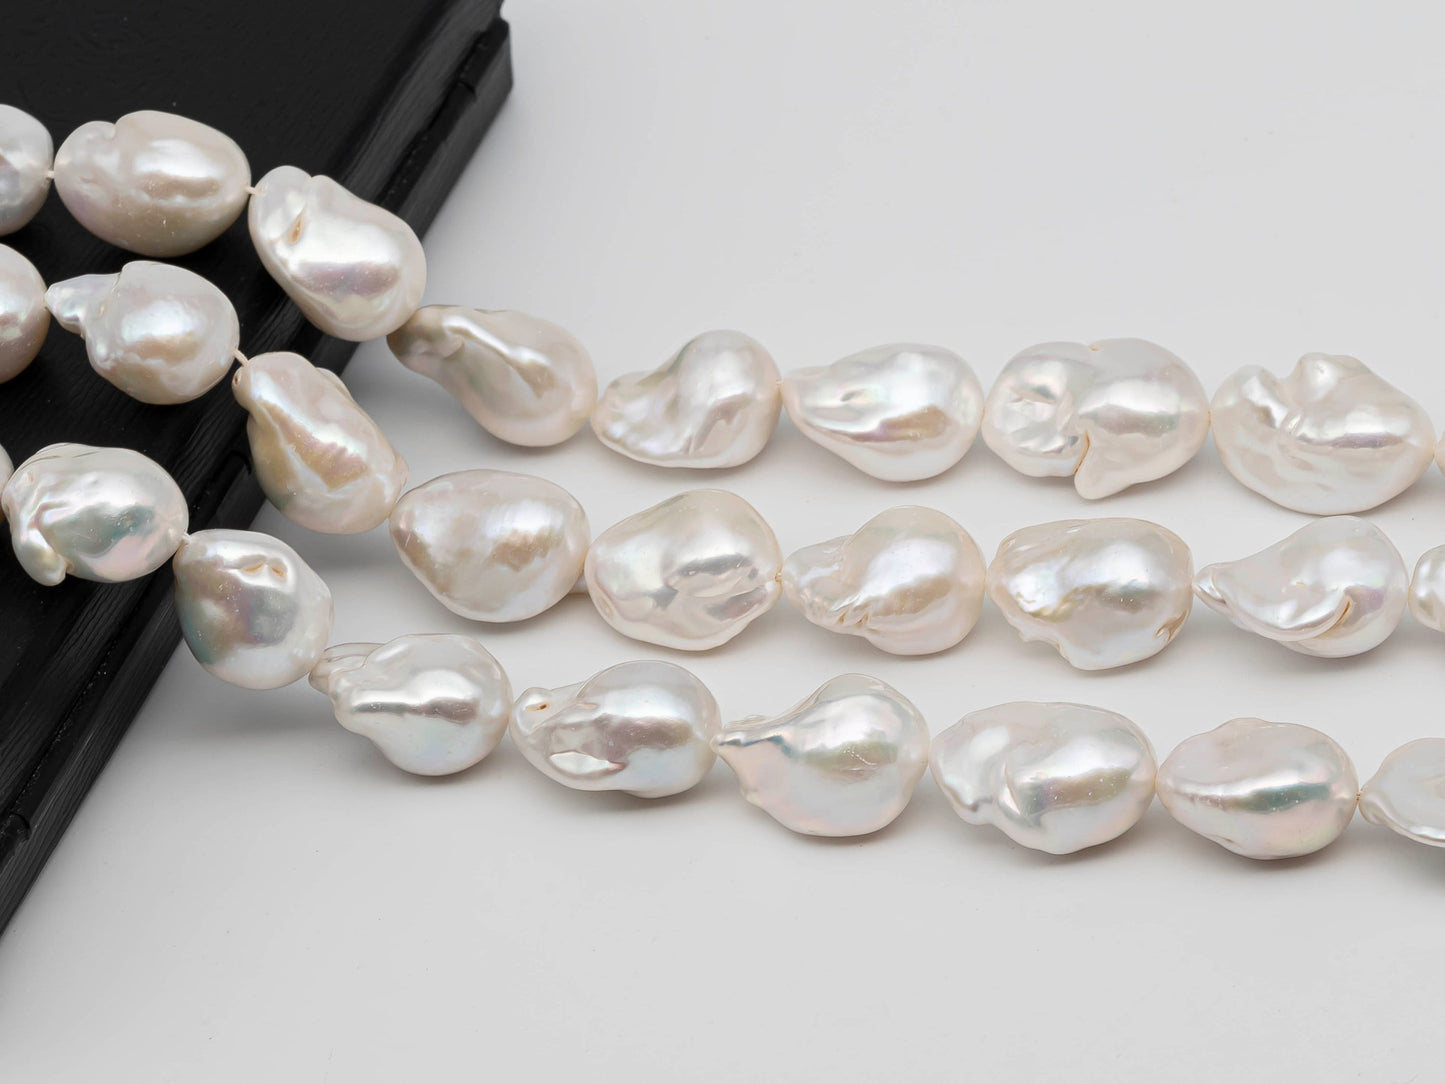 15-17mm White Baroque Fireball Pearl Beads in Full Strand with Nice Luster for Jewelry Making, SKU # 1268BA